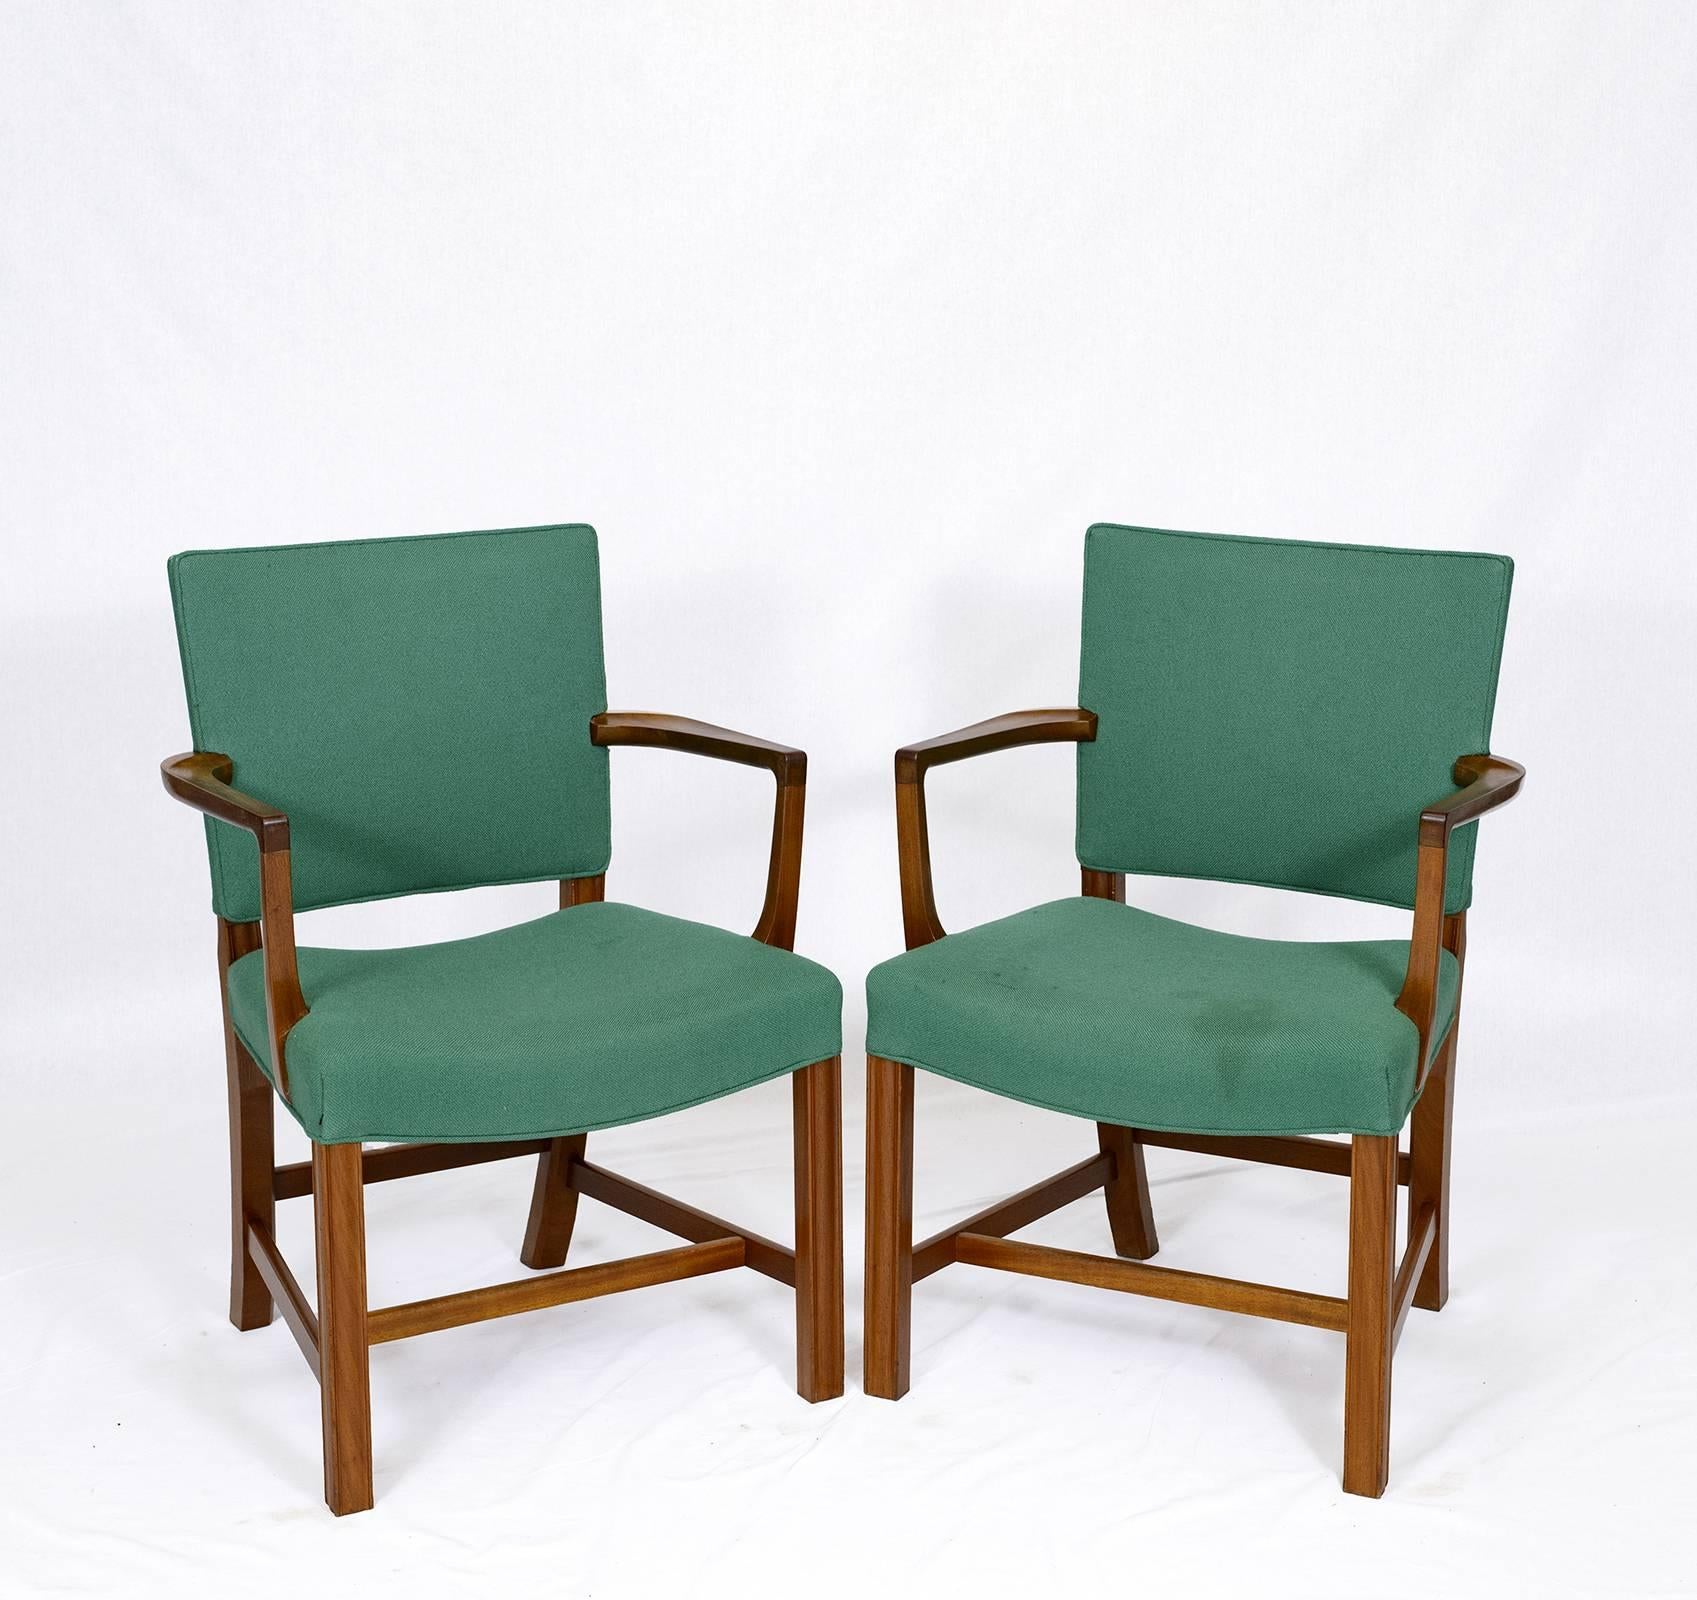 Pair of Kaare Klint armchairs designed in 1927 and produced by Rud Rasmussen.   Store formerly known as ARTFUL DODGER INC